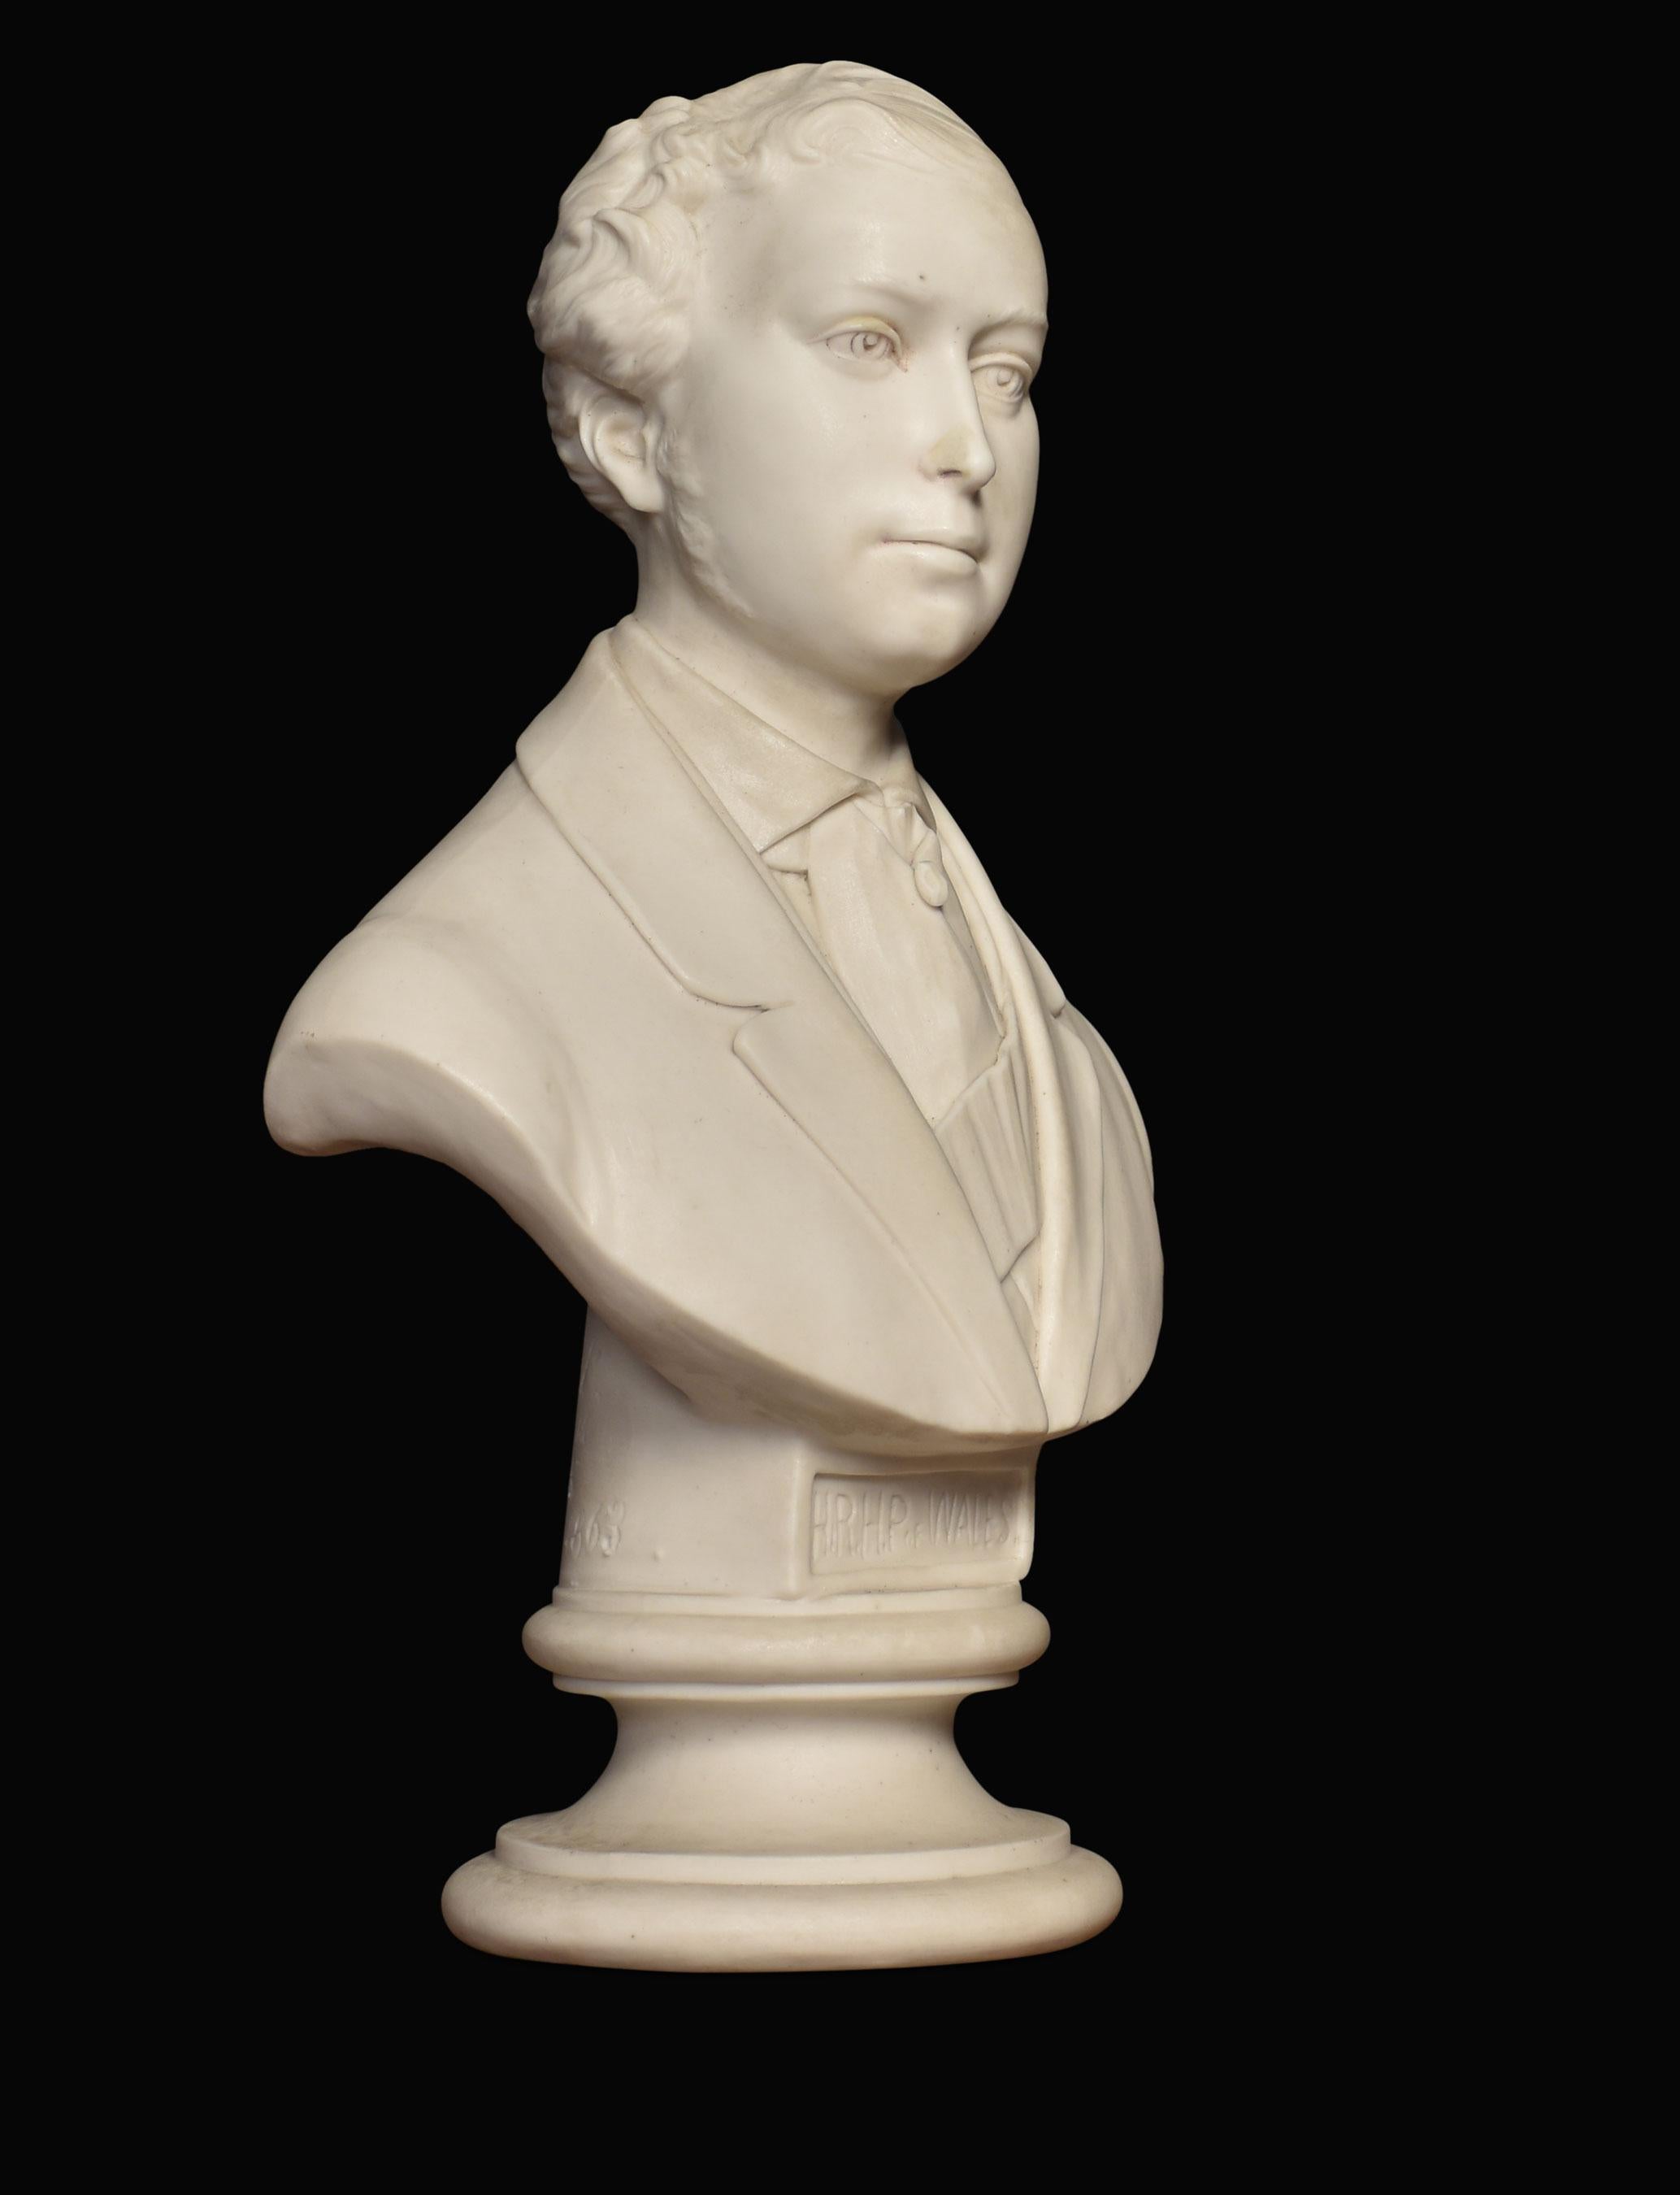 Coalport bust by John Rose & Co of King Charles raised up on circular stepped base.
Dimensions
Height 13.5 inches
Width 8 inches
Depth 5 inches.